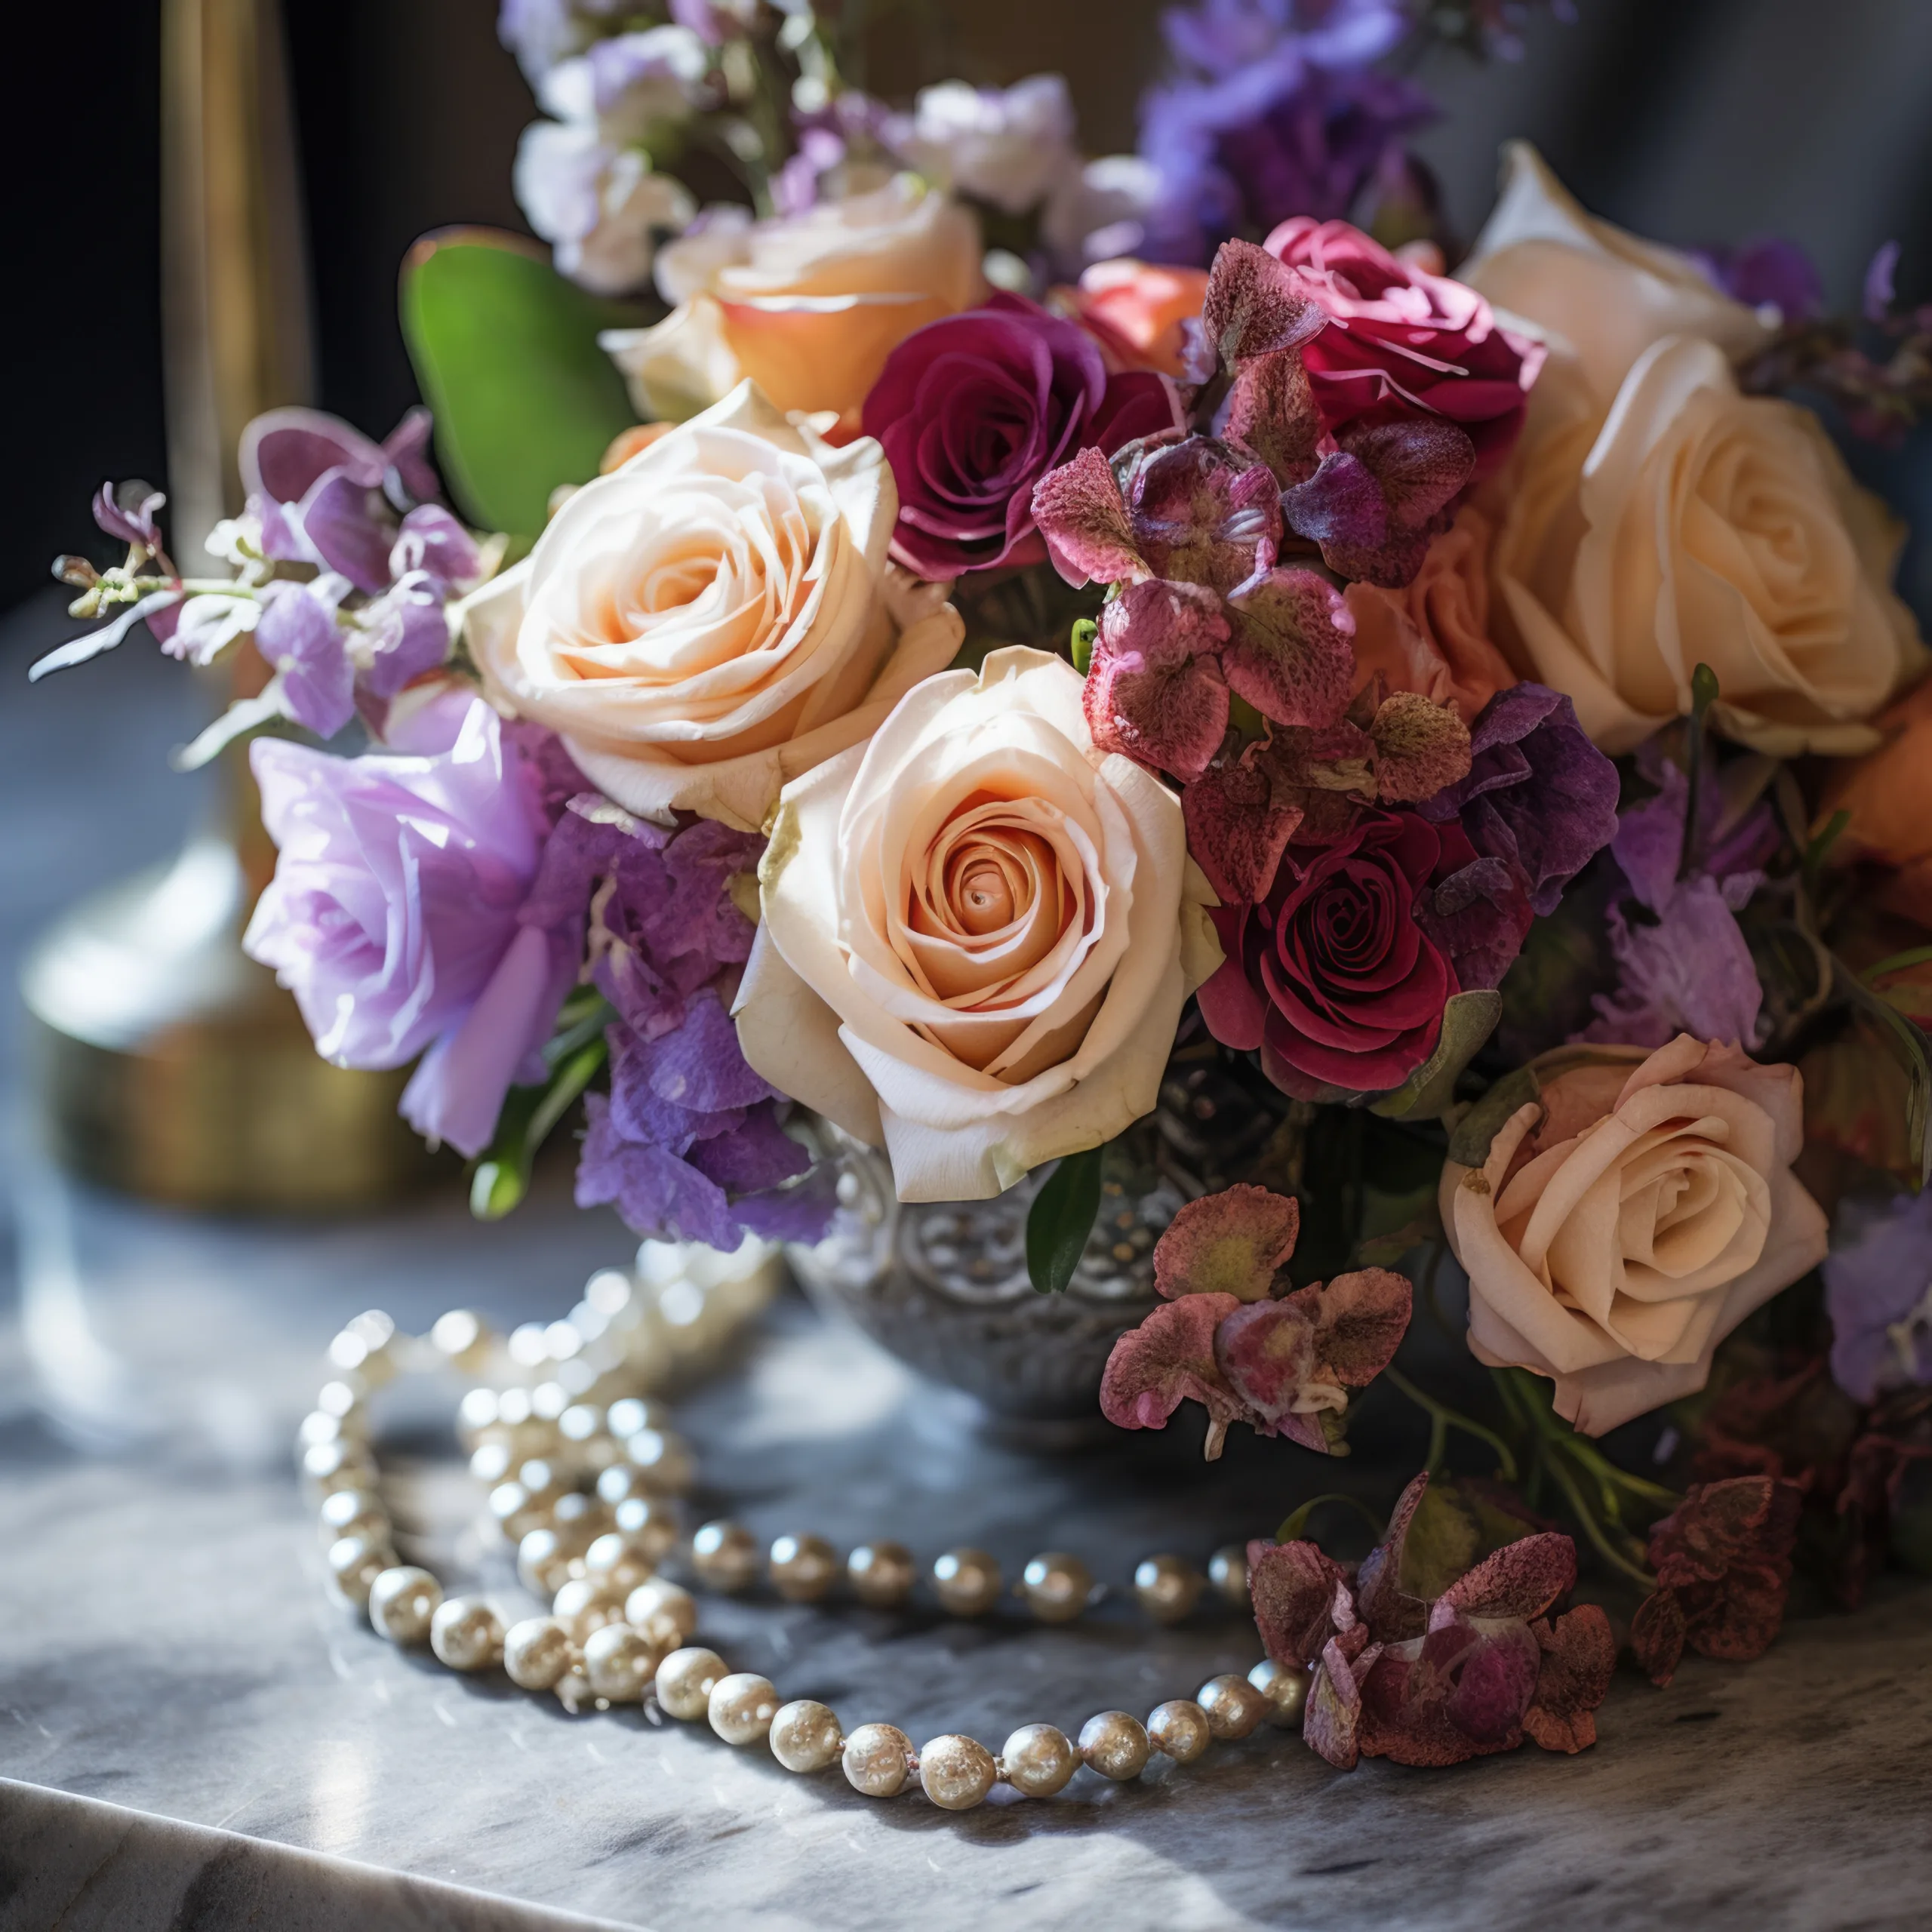 Photo Skills: a bouquet of flowers and pearls on a table.